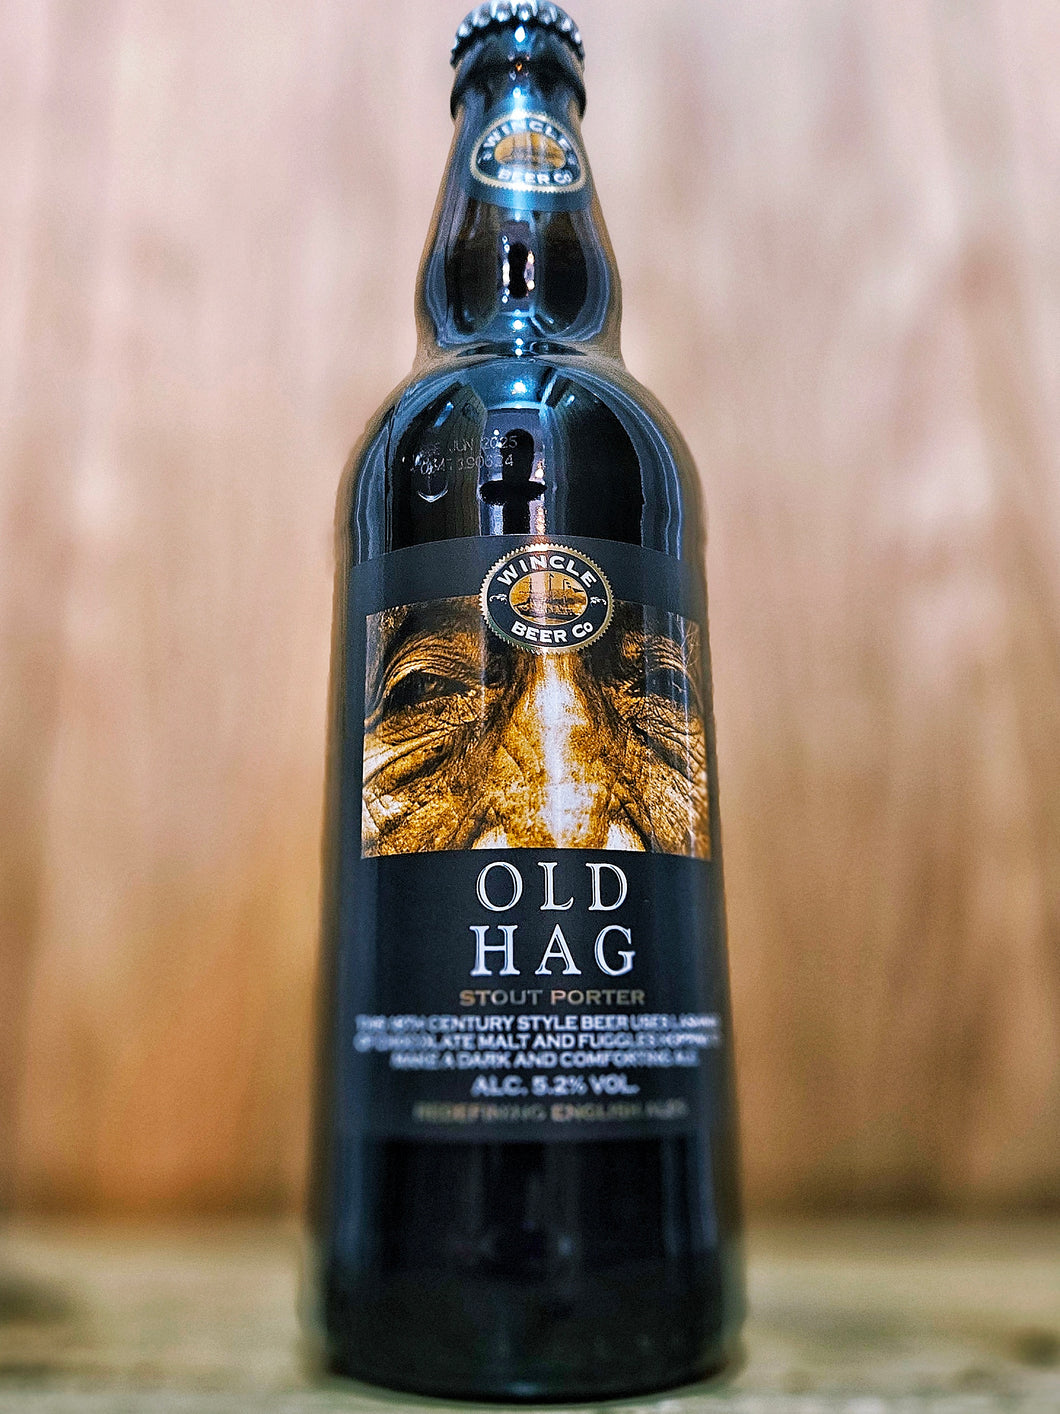 Wincle Beer Co - Old Hag